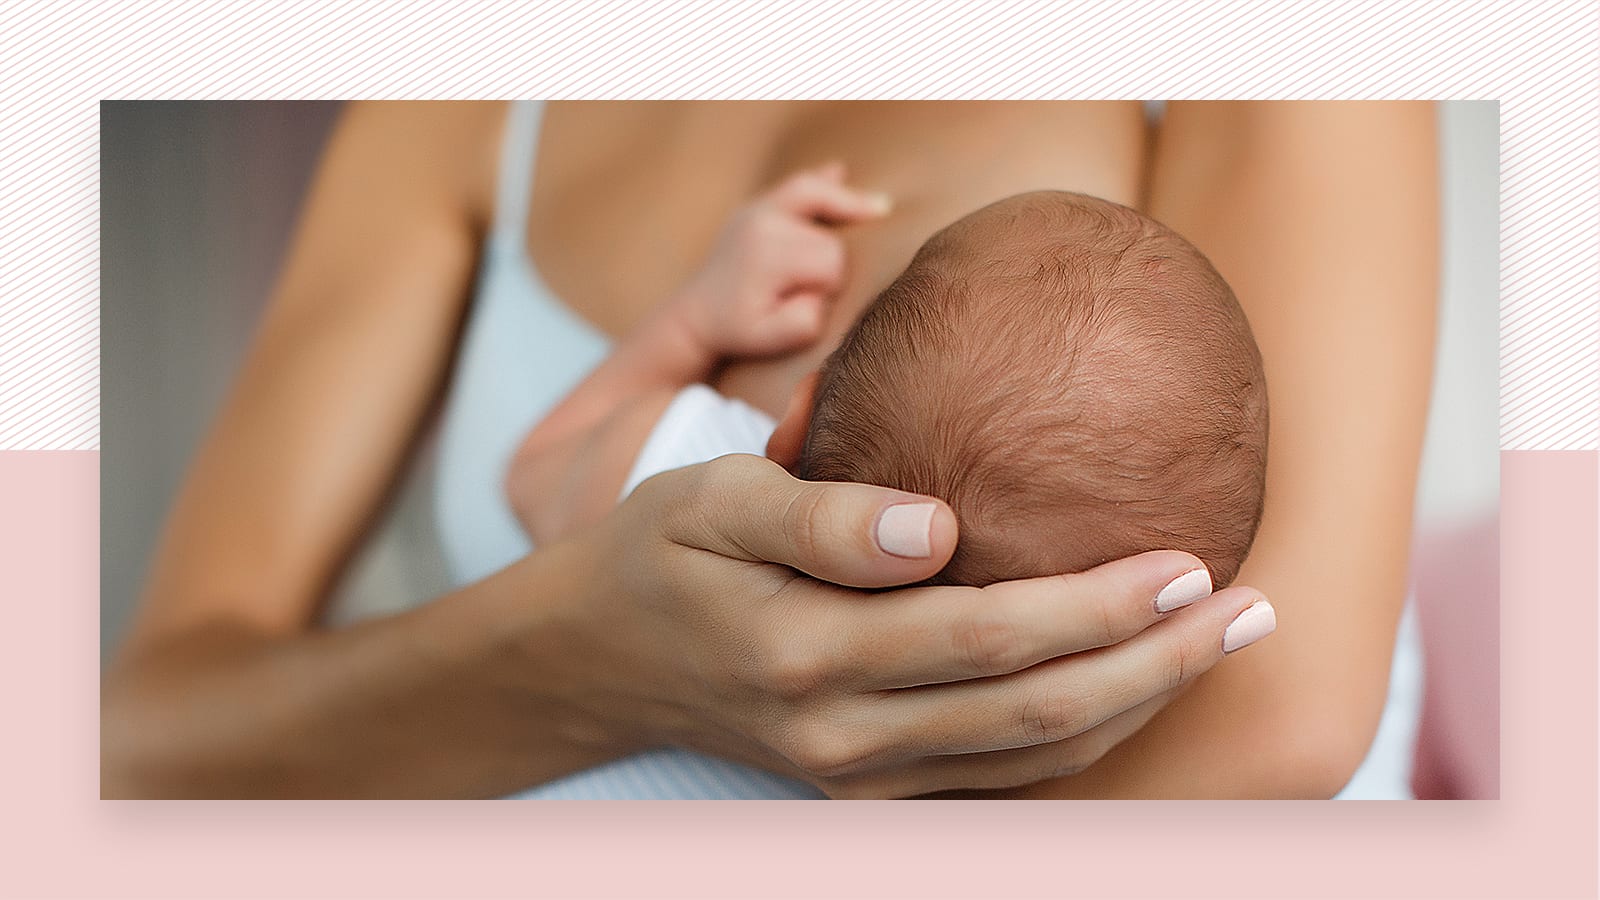 Is it safe to have laser hair removal while breastfeeding?